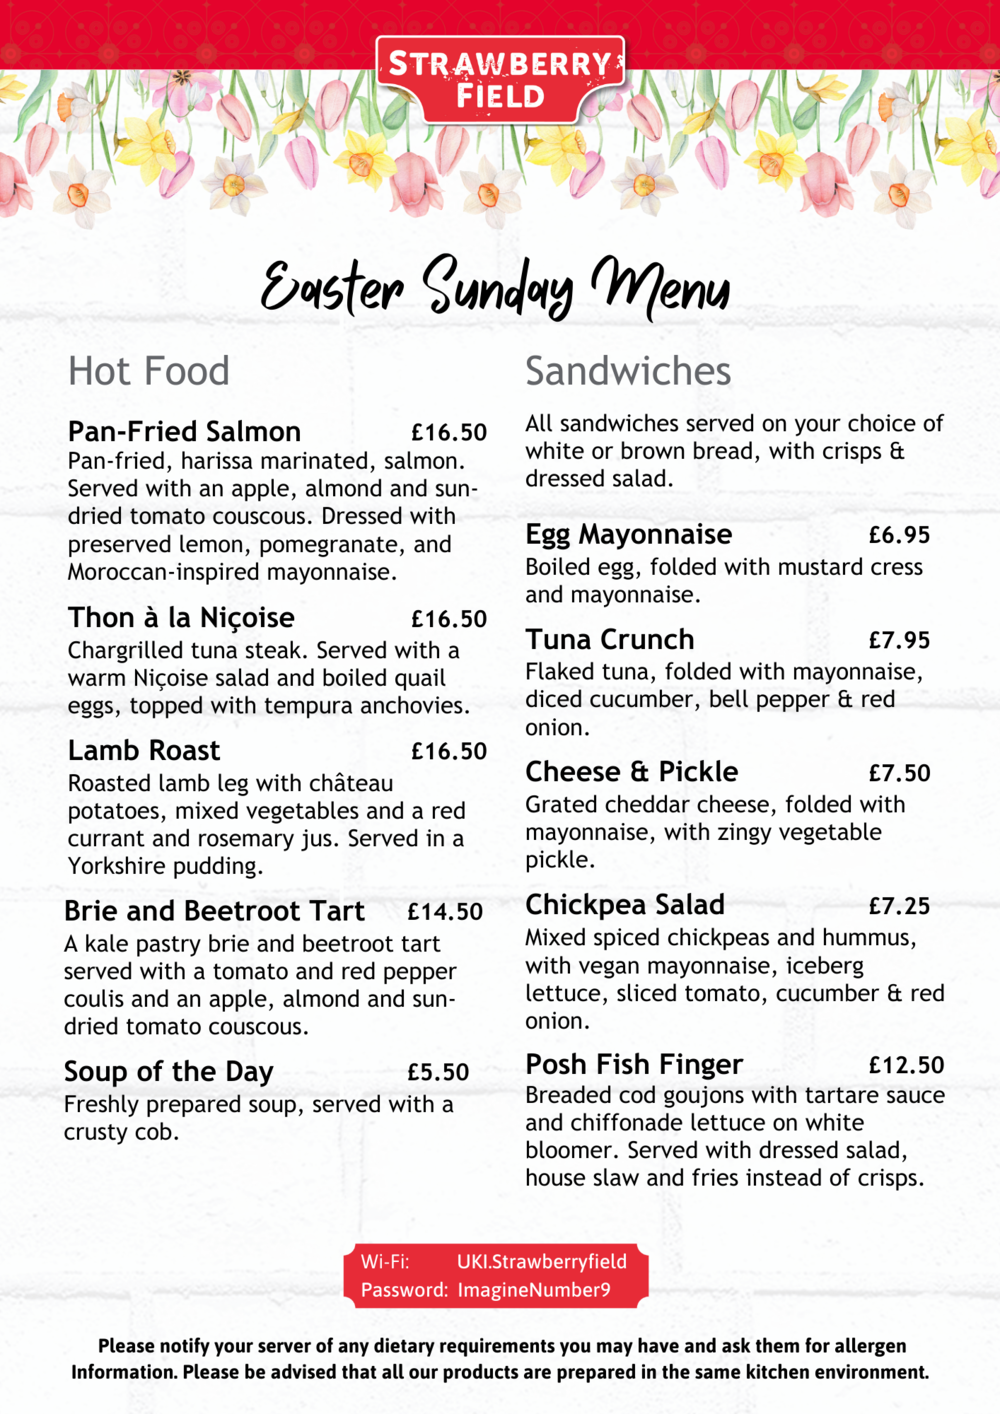 Easter Sunday lunch menu in the Imagine More Cafe at Strawberry Field Liverpool